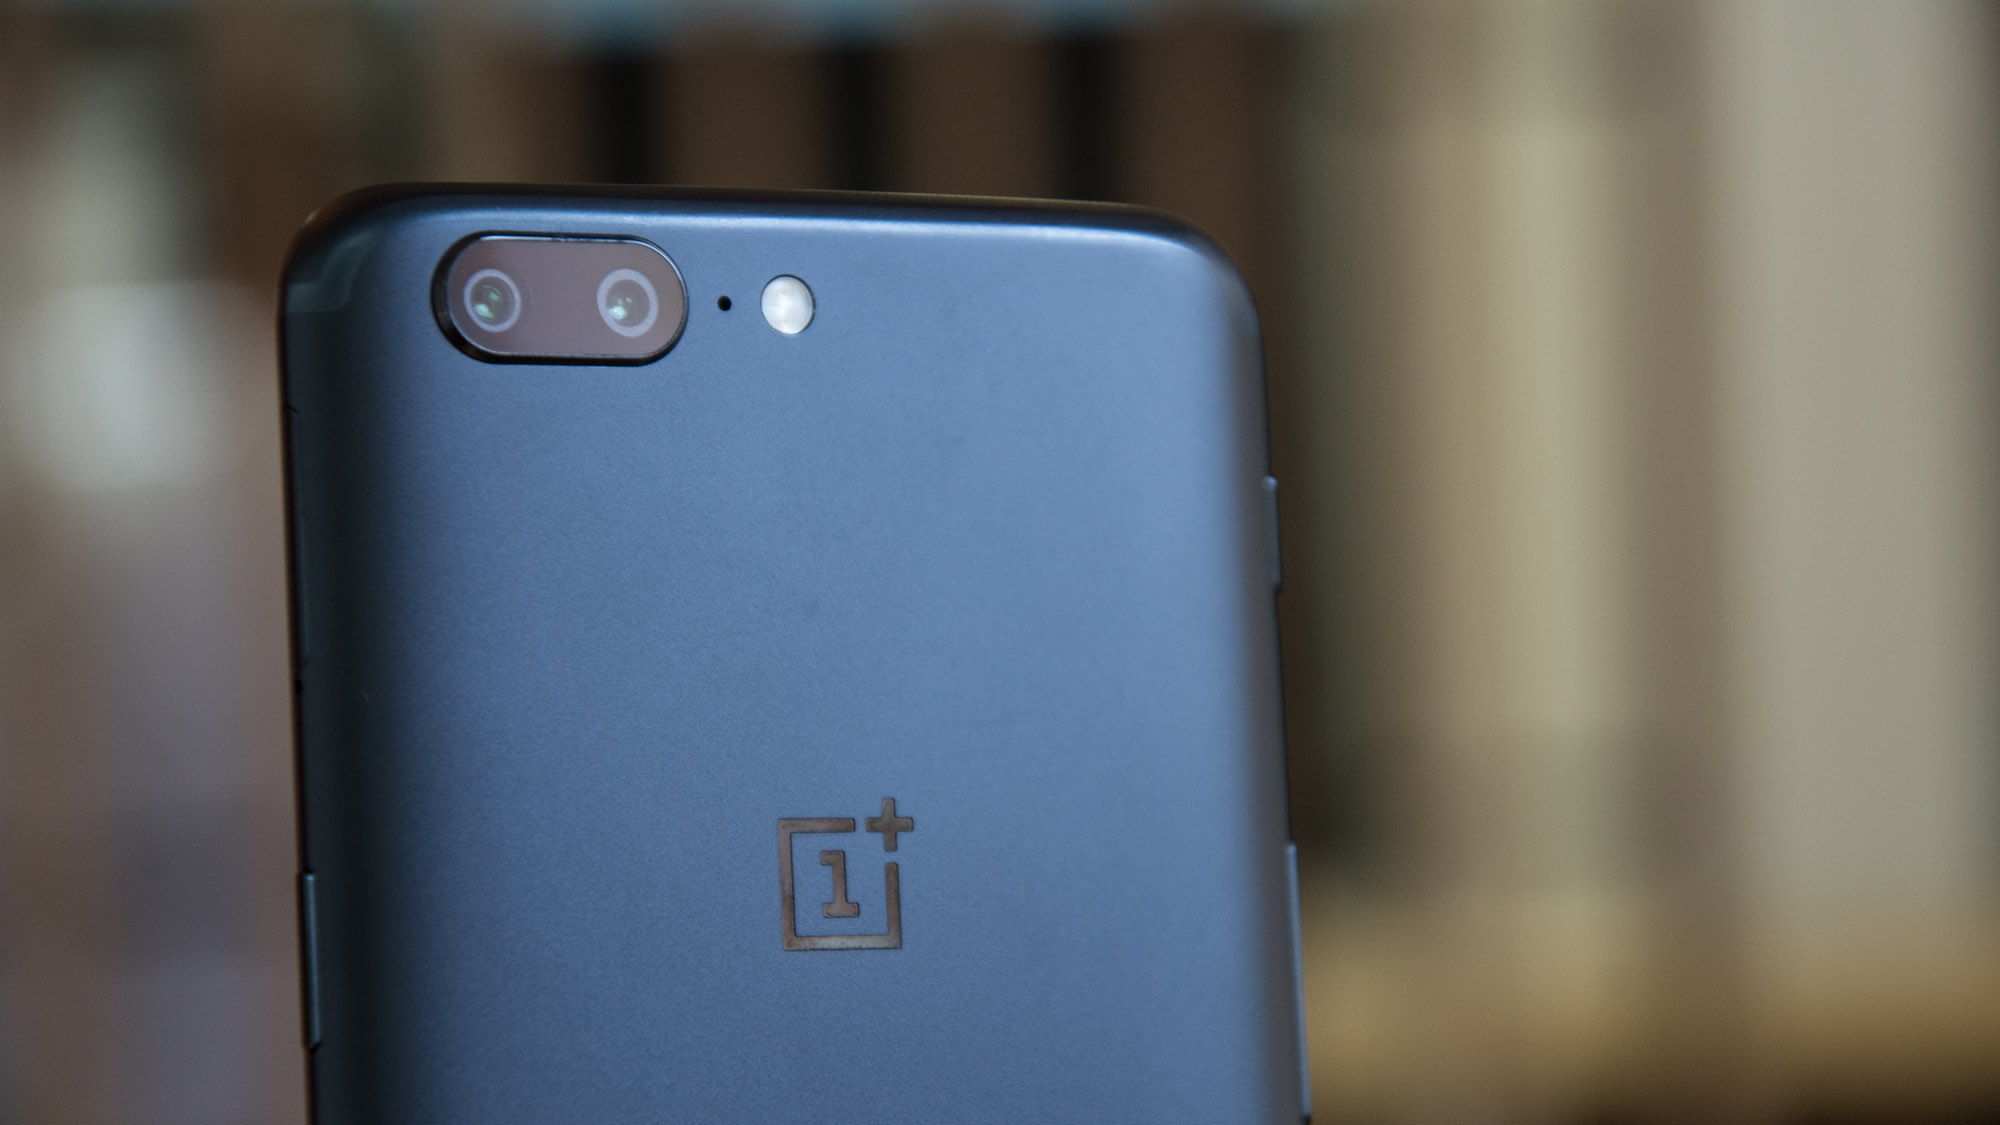 OnePlus releases OxygenOS 4.5.12 for the OnePlus 5 devices 4